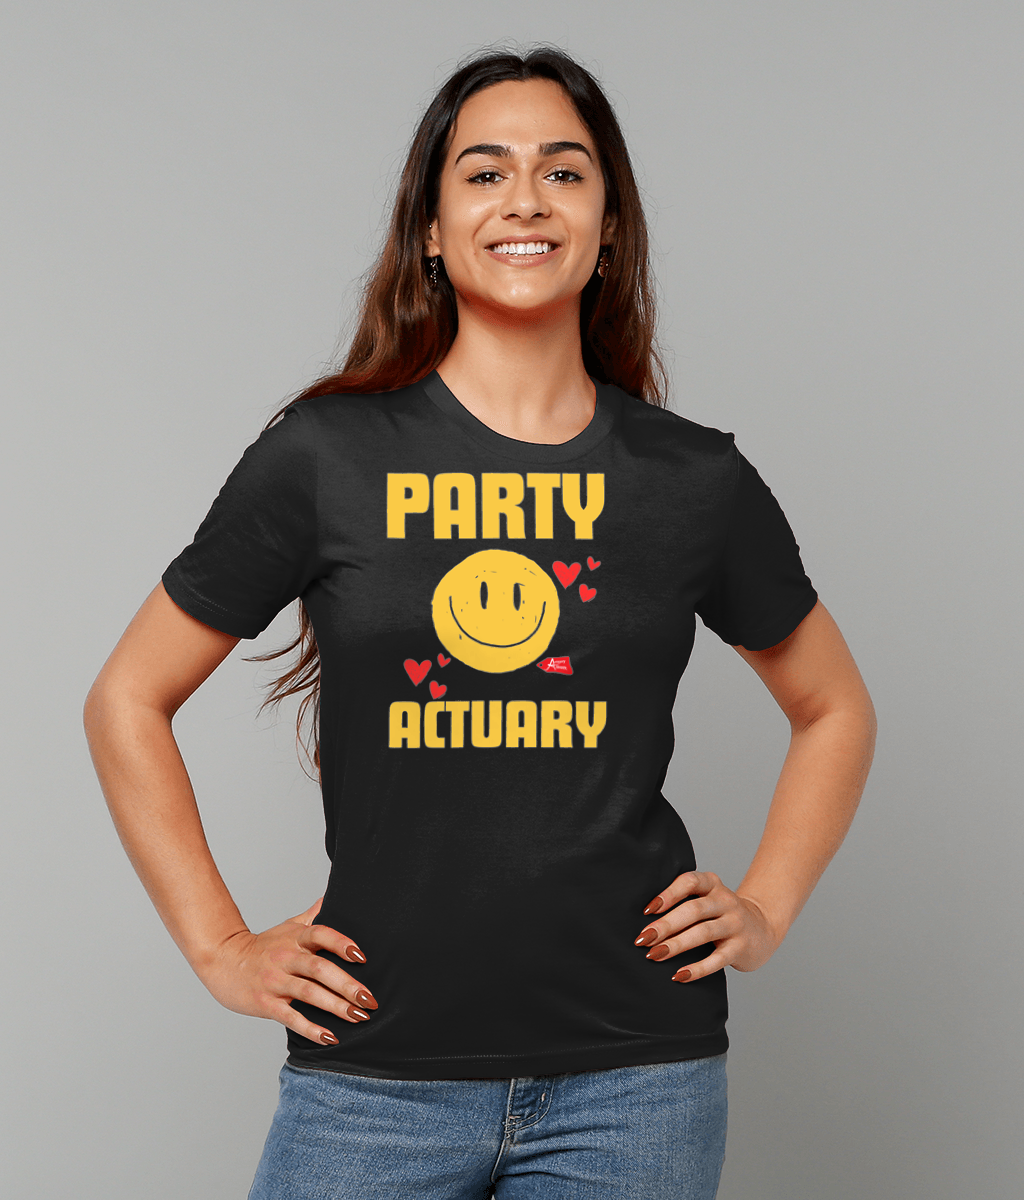 Party Actuary Smiley Hearts Black T-Shirt